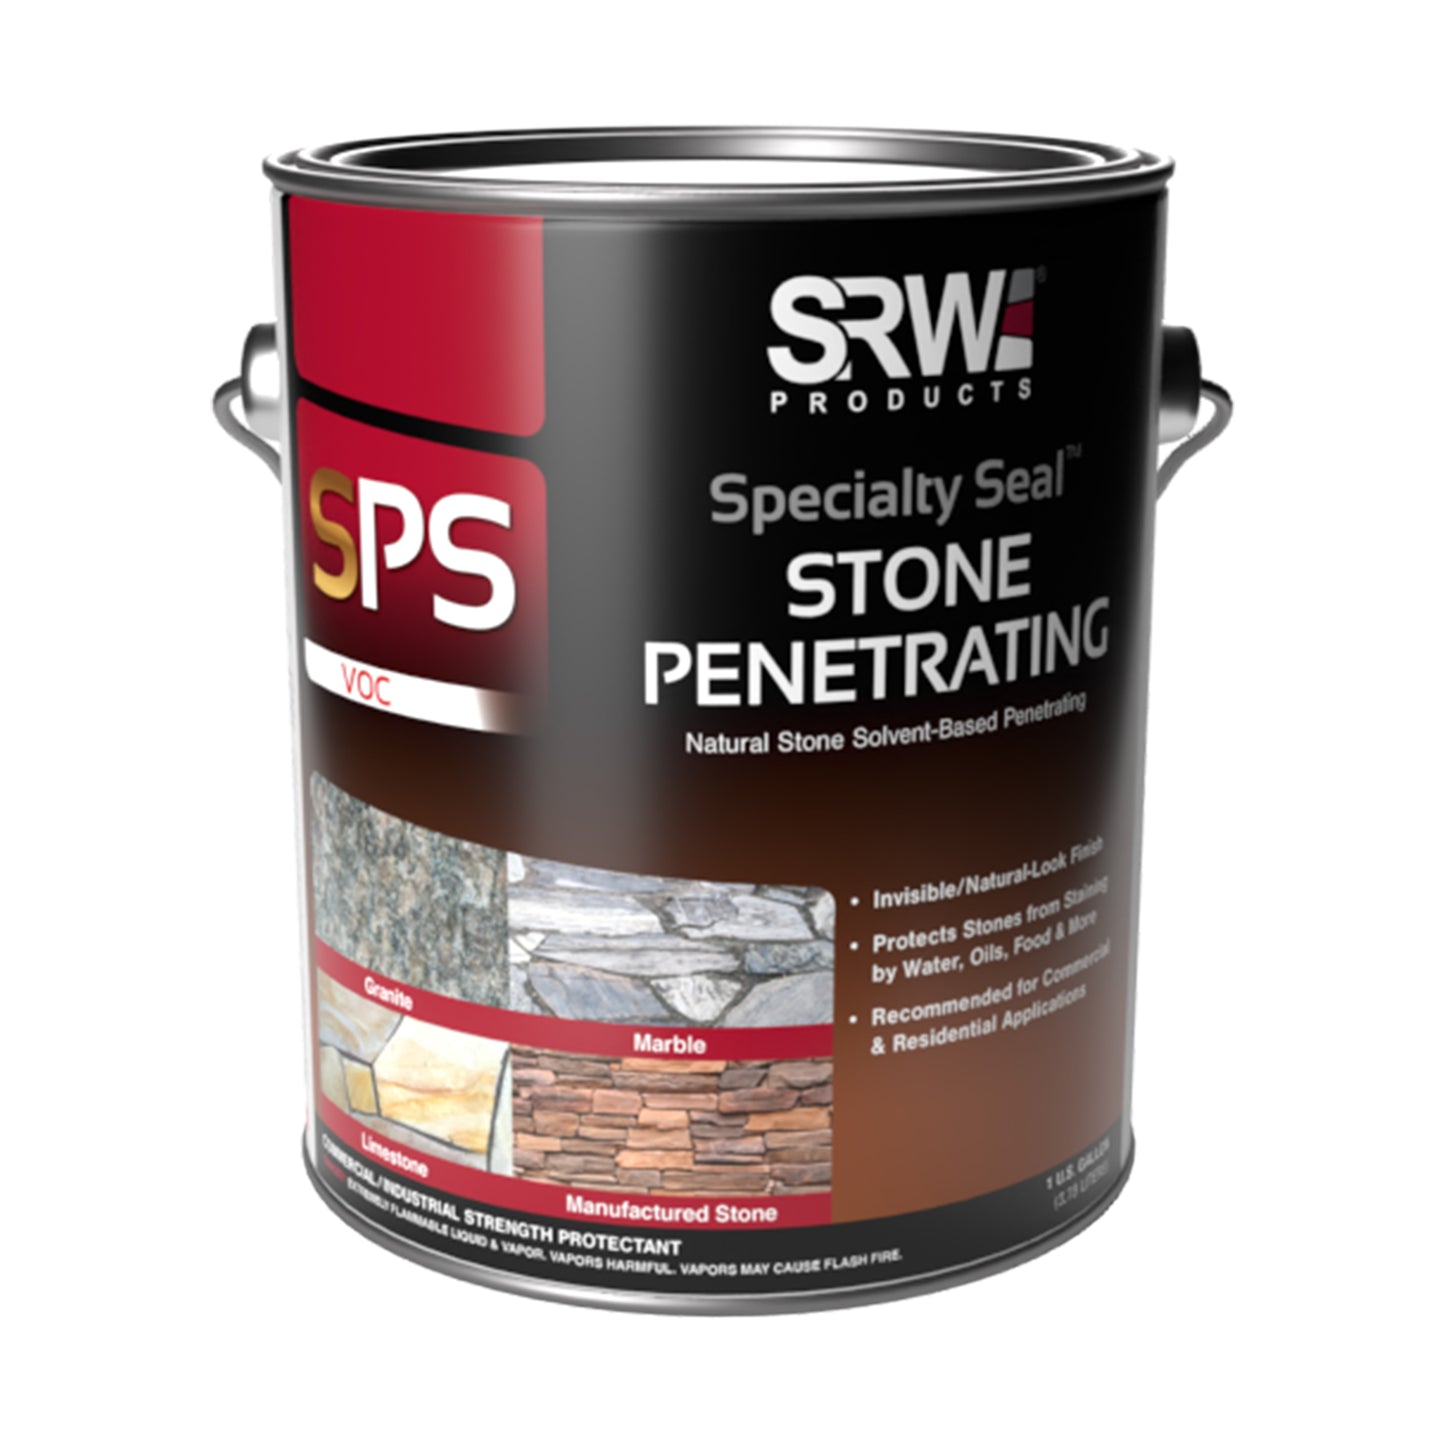 SRW Products S-PS VOC Stone Penetrating - Specialty Seal™ can